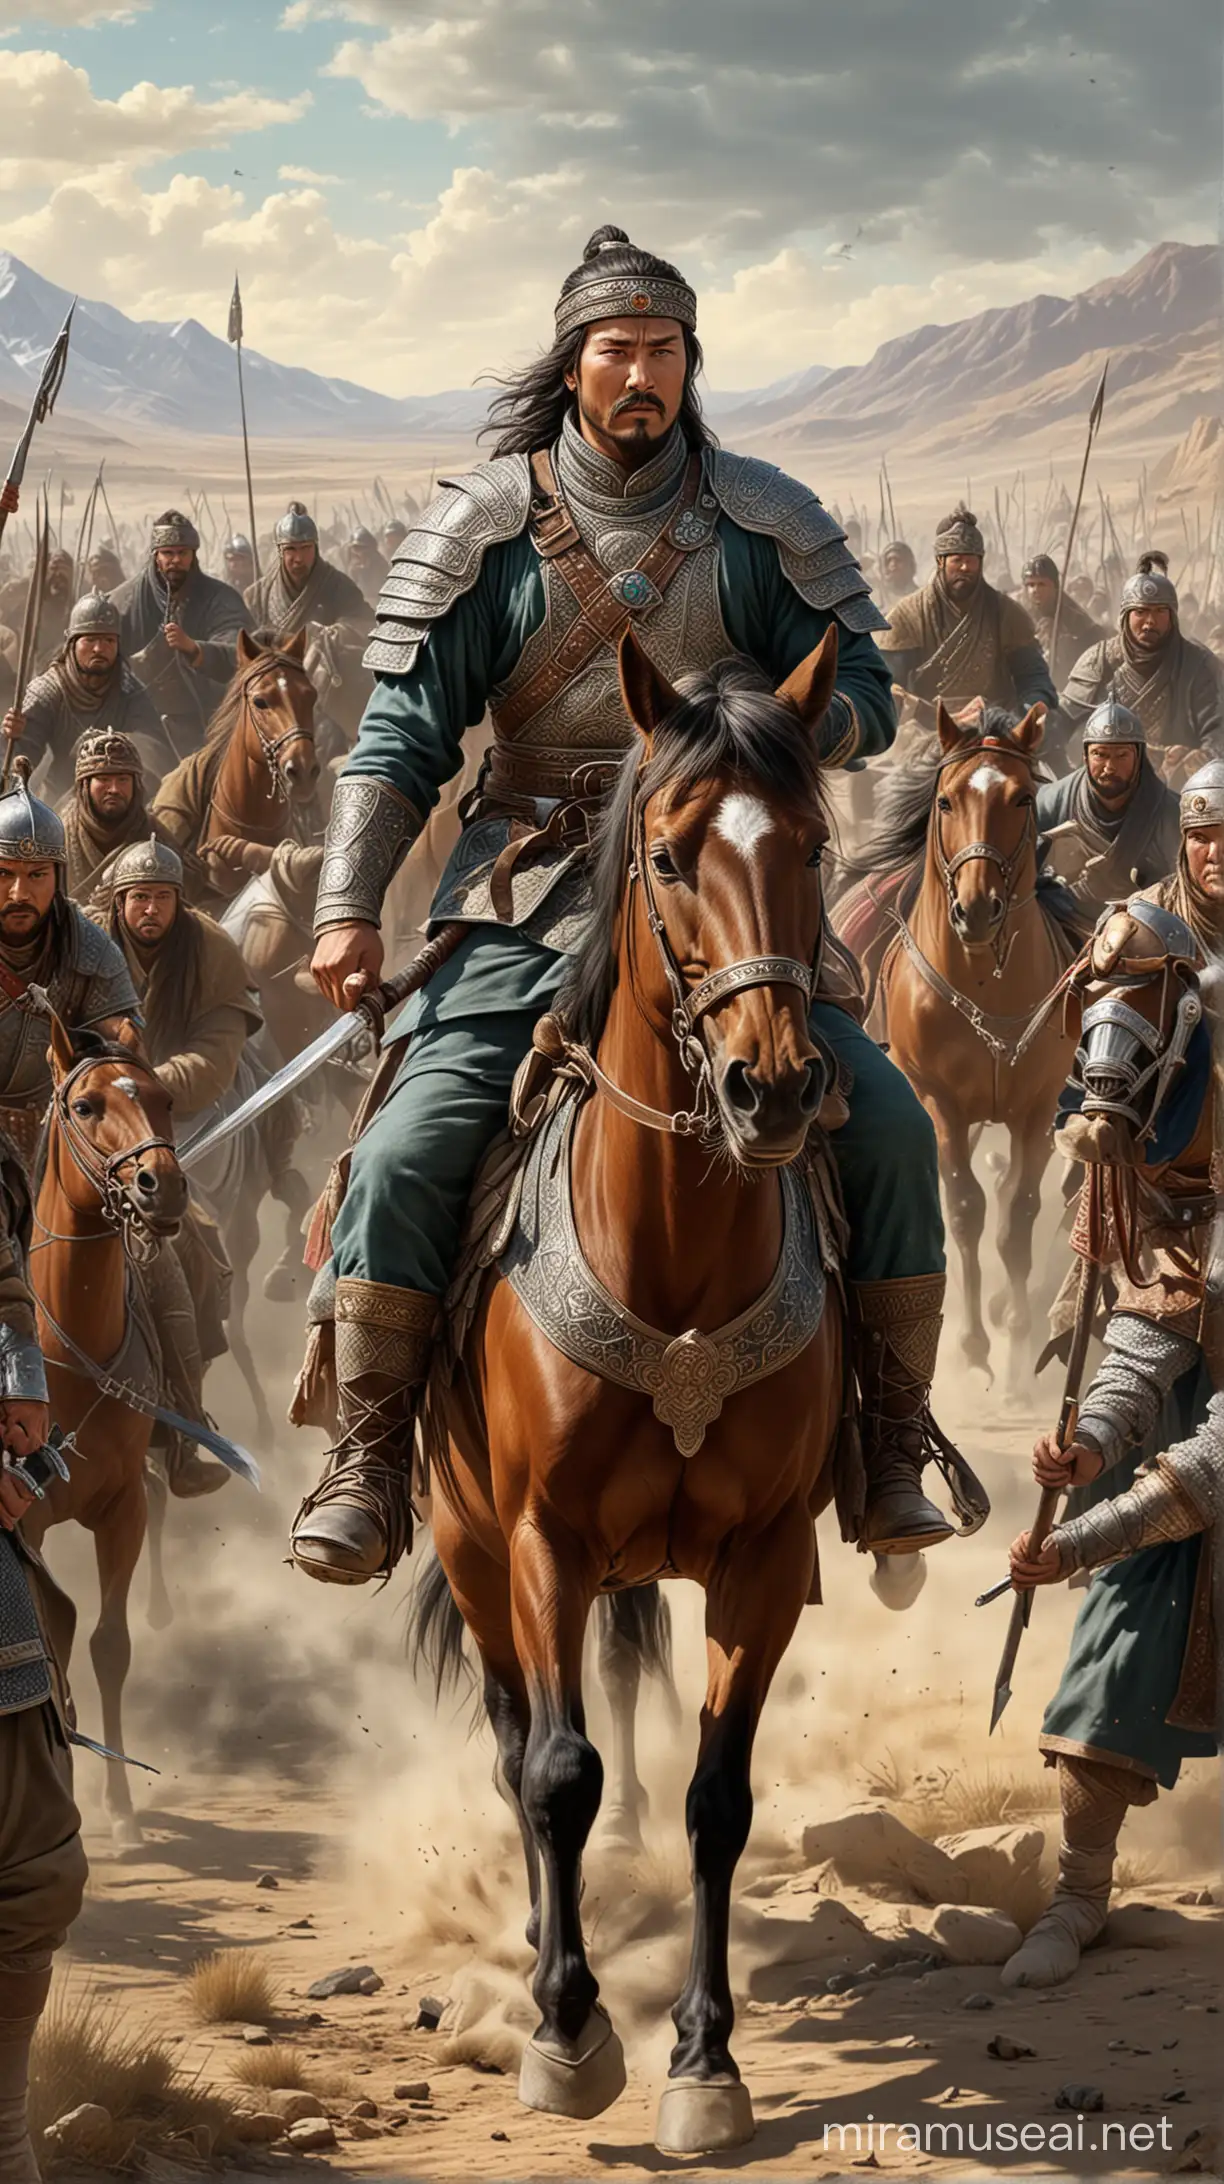 Hyper Realistic Illustration of Genghis Khans SoninLaw Leading Troops into Battle